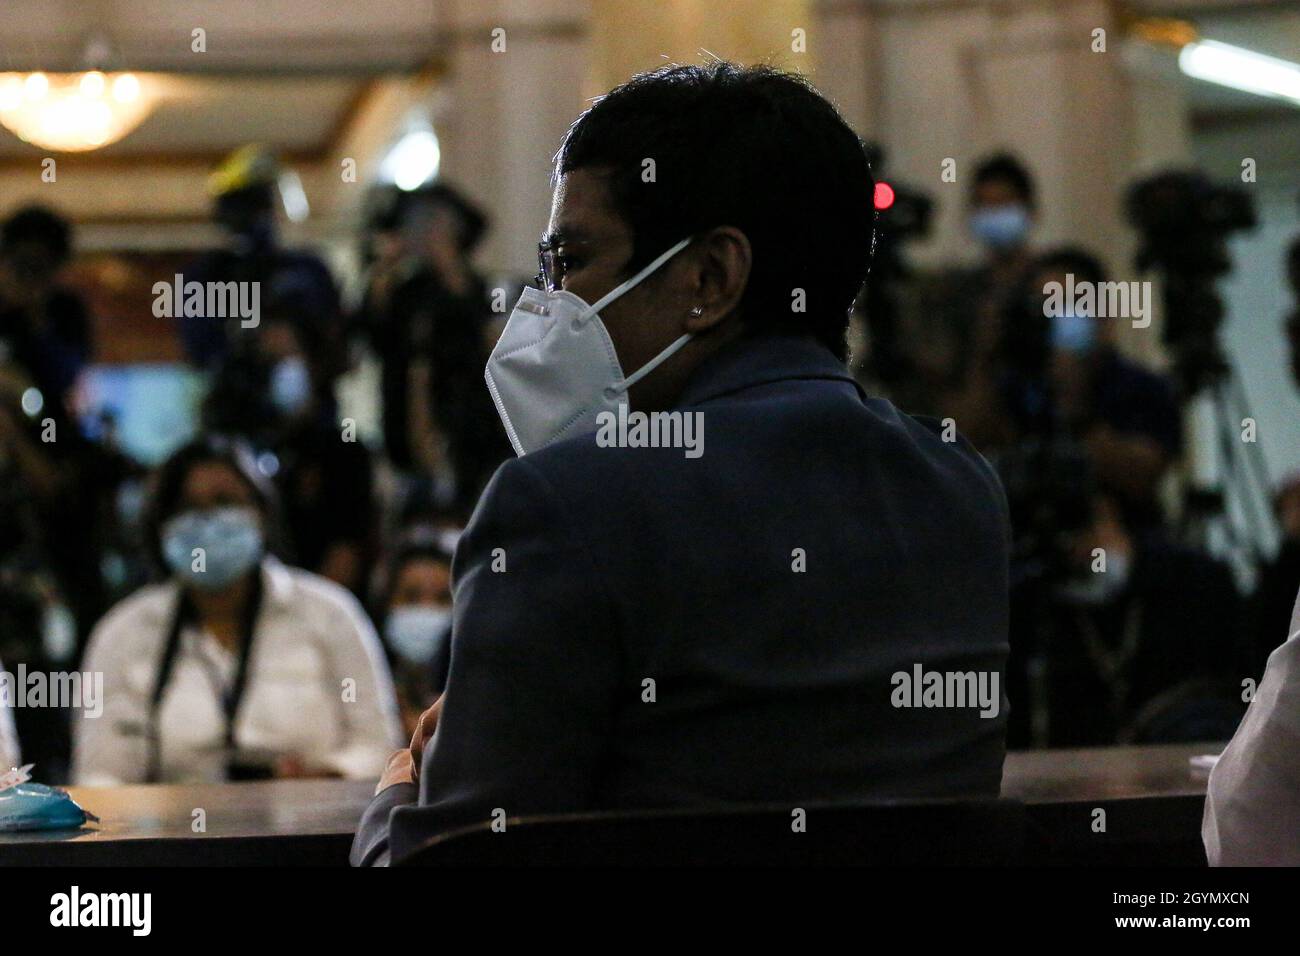 Rappler CEO and Executive Editor, Maria Ressa (center) wearing a protective mask attends a media conference after a court hearing at the Manila Regional Trial Court, Philippines on Monday. June 15, 2020. The Manila court found Maria Ressa, her online news outfit Rappler Inc. and former reporter Reynaldo Santos Jr. guilty of cyber libel. Philippines. Stock Photo